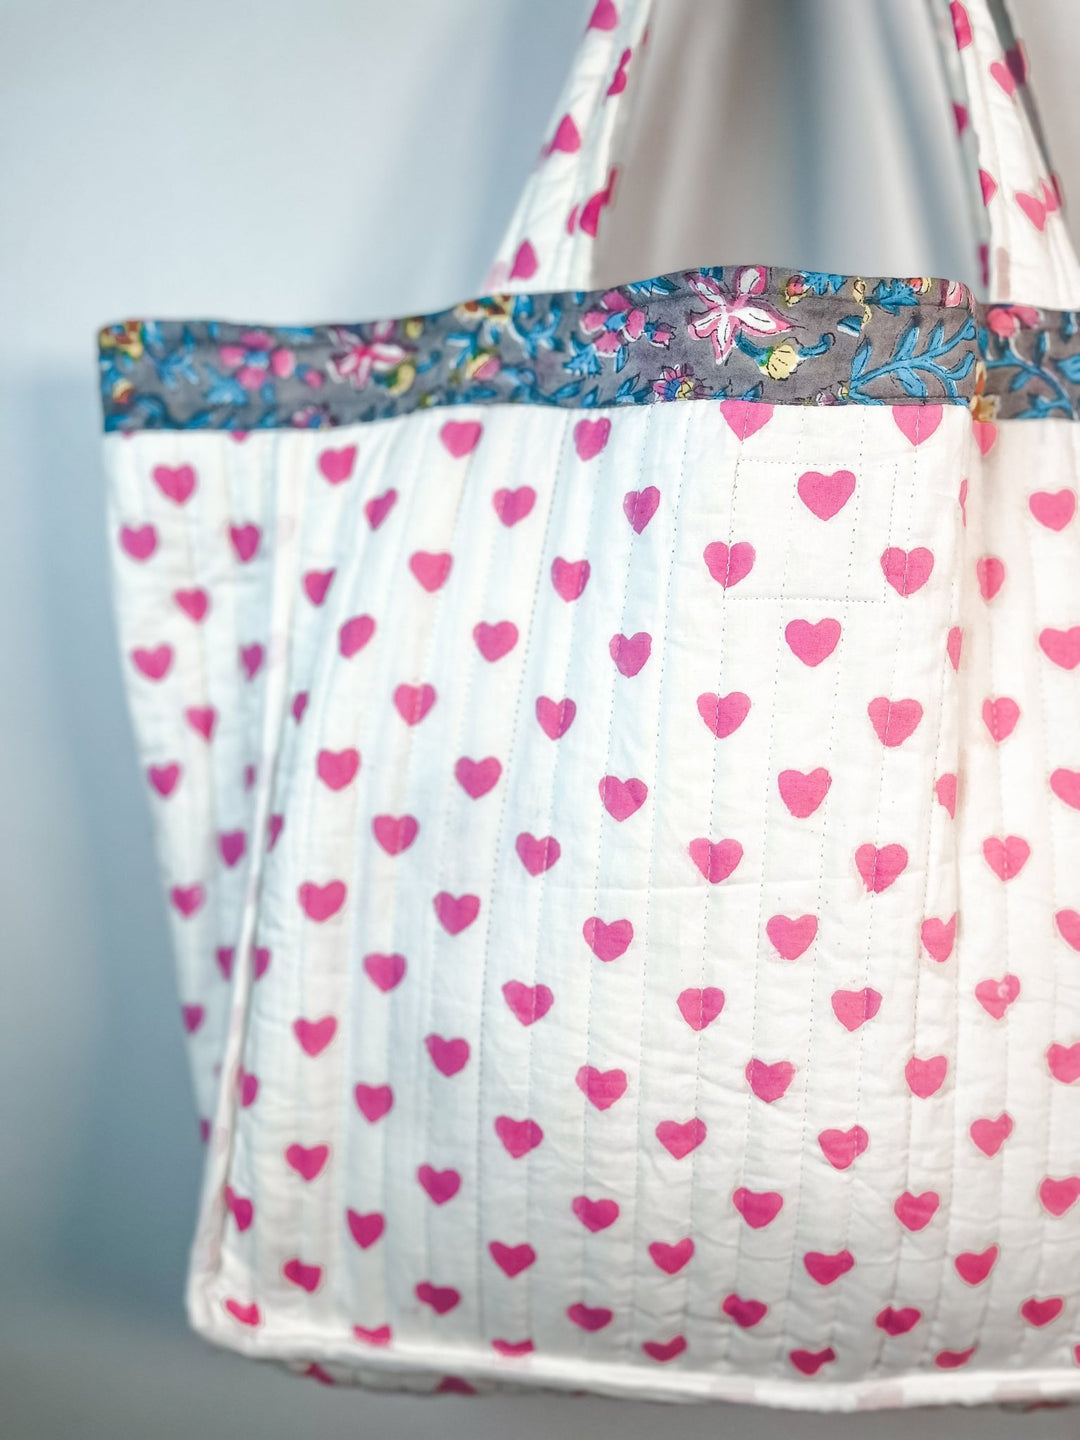 Handmade Quilted Tote Bags | Lata Floral - Bombaby